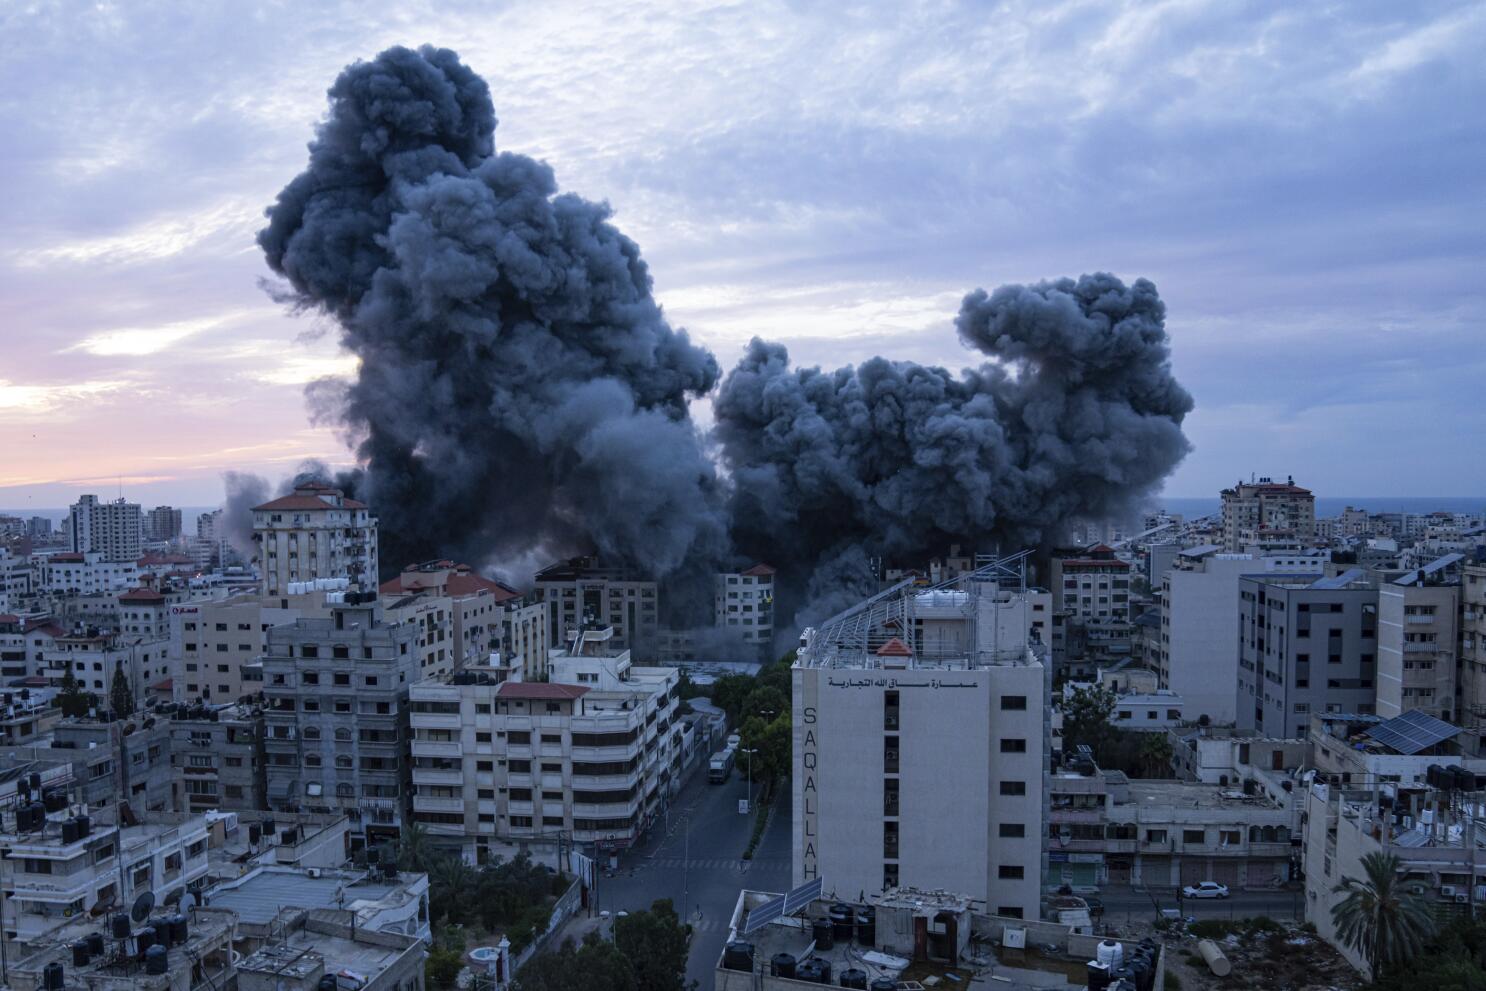 Israel battles militants for second day after Hamas attack shock